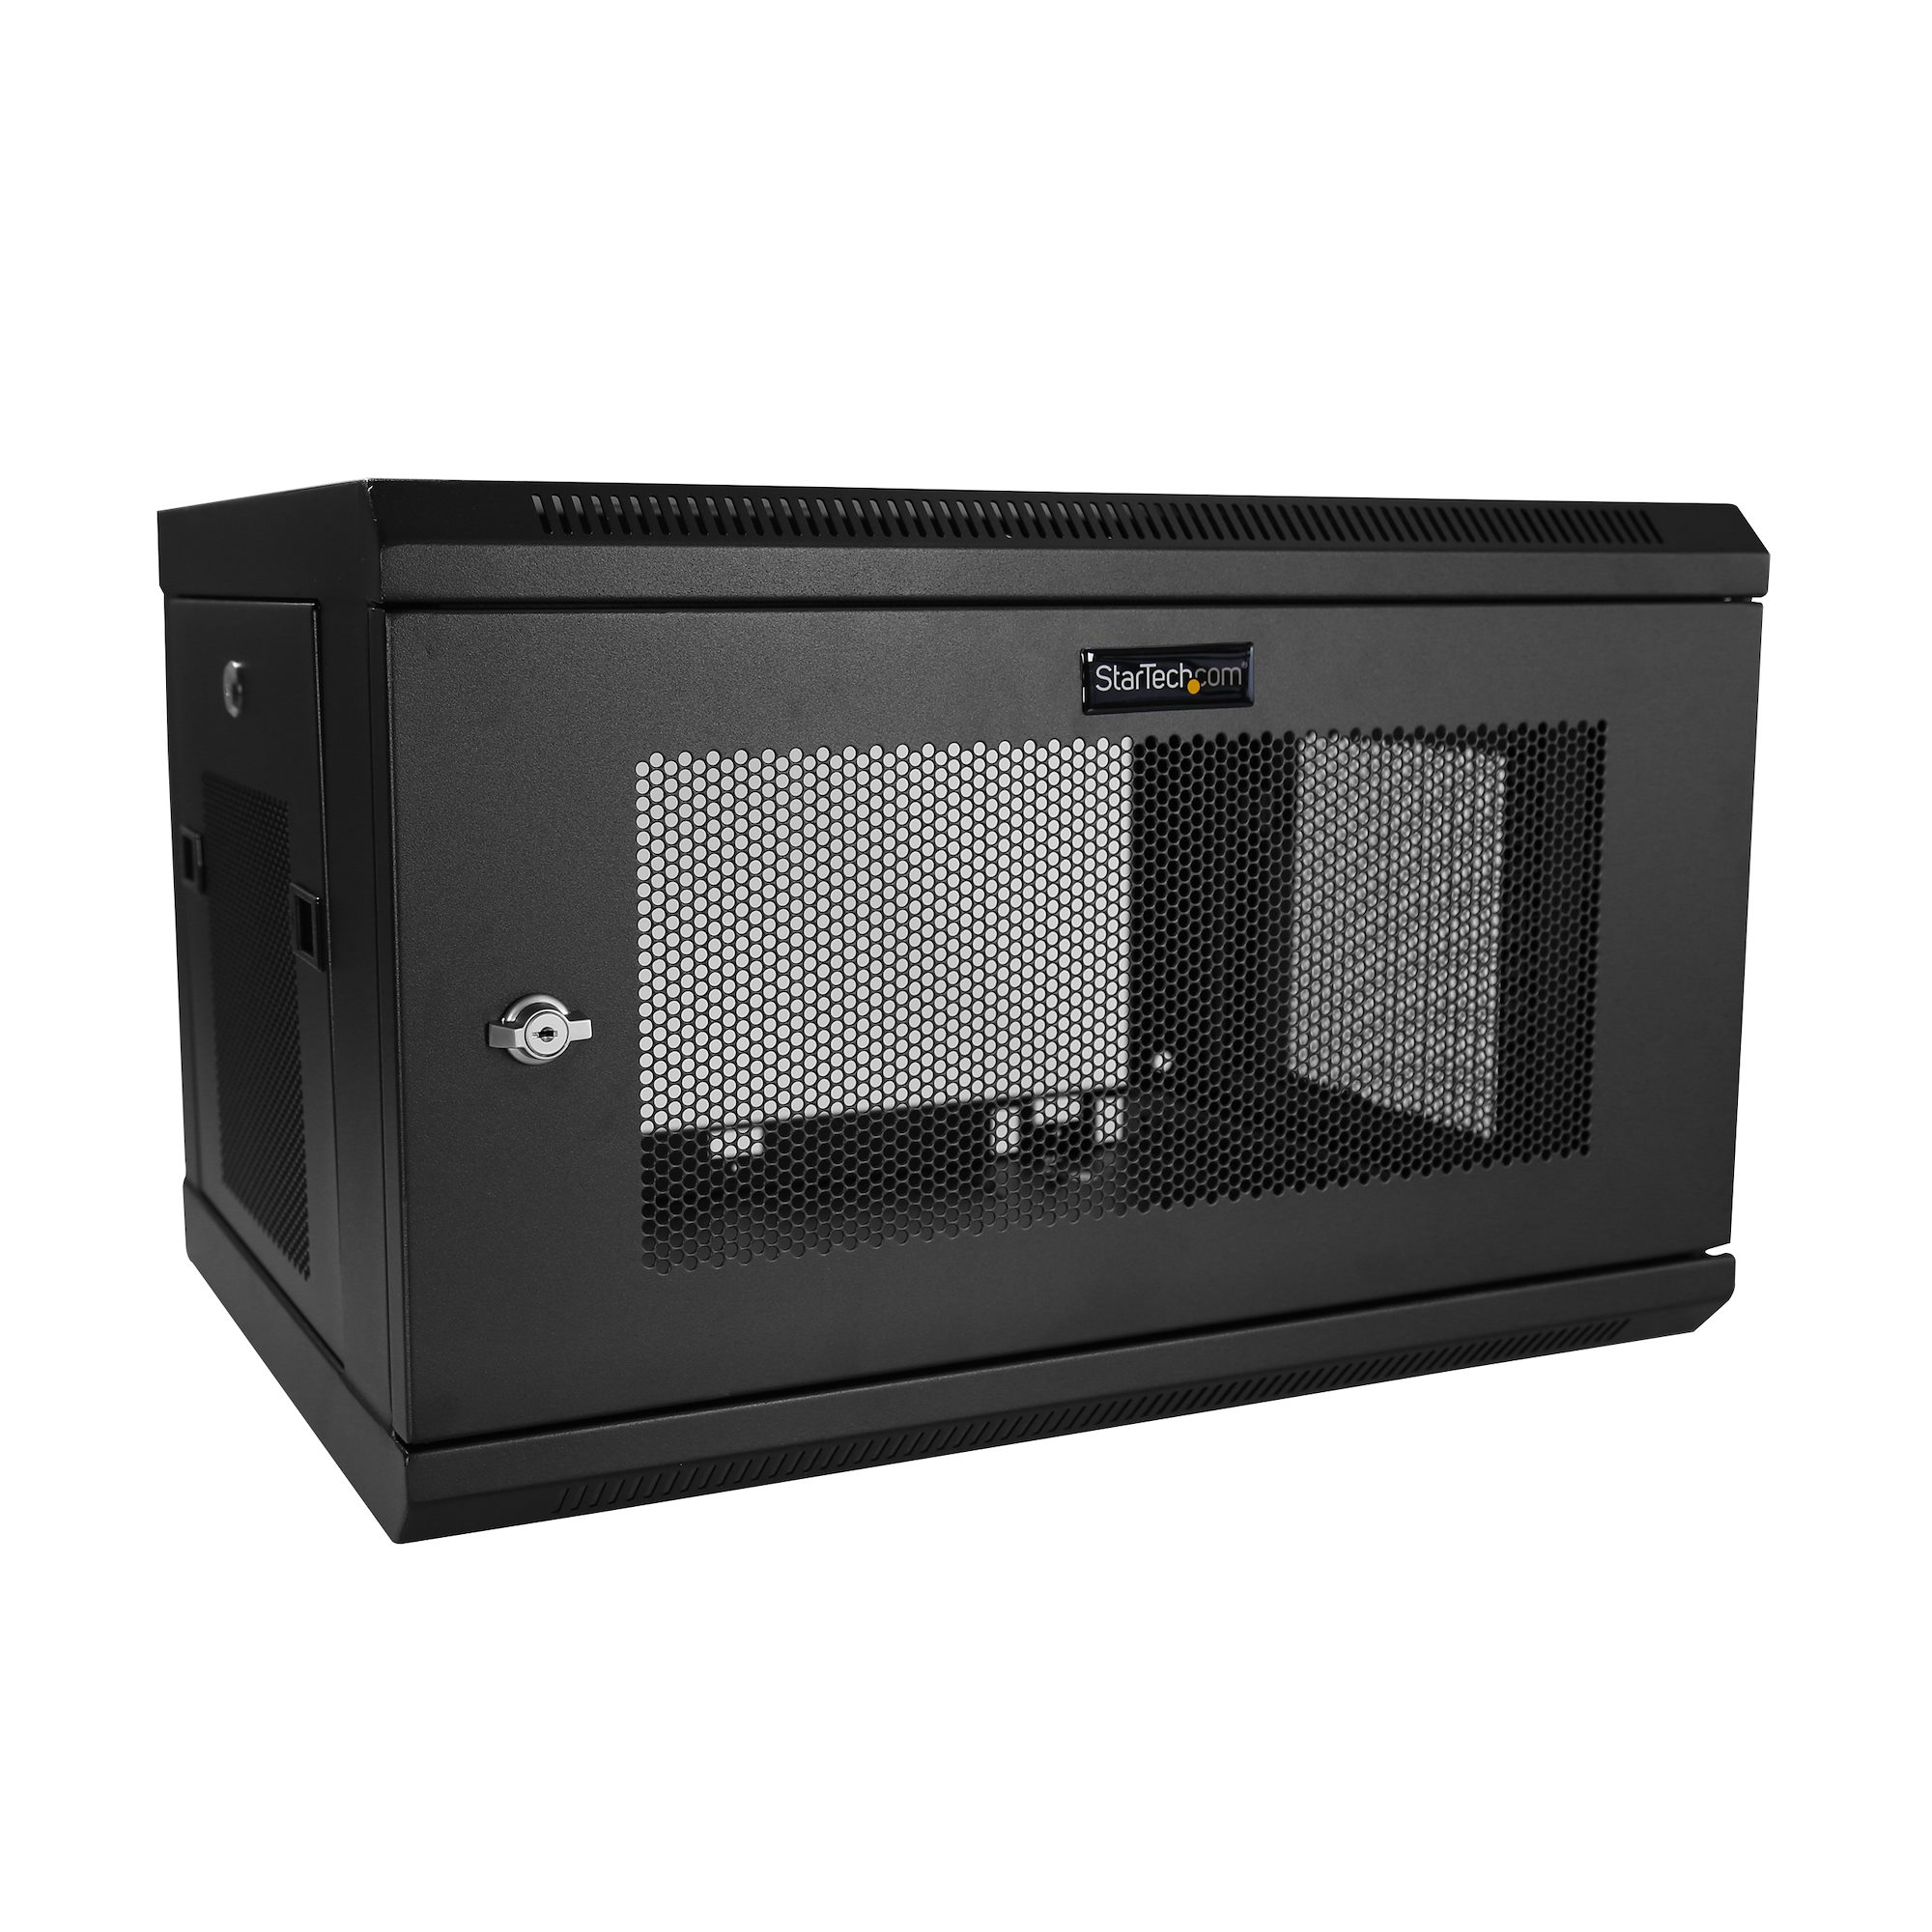 Optional casters can be Installed 6U Rack-Mounted Wall Cabinet Cabinet RMWC6UG-1N with Glass Door 